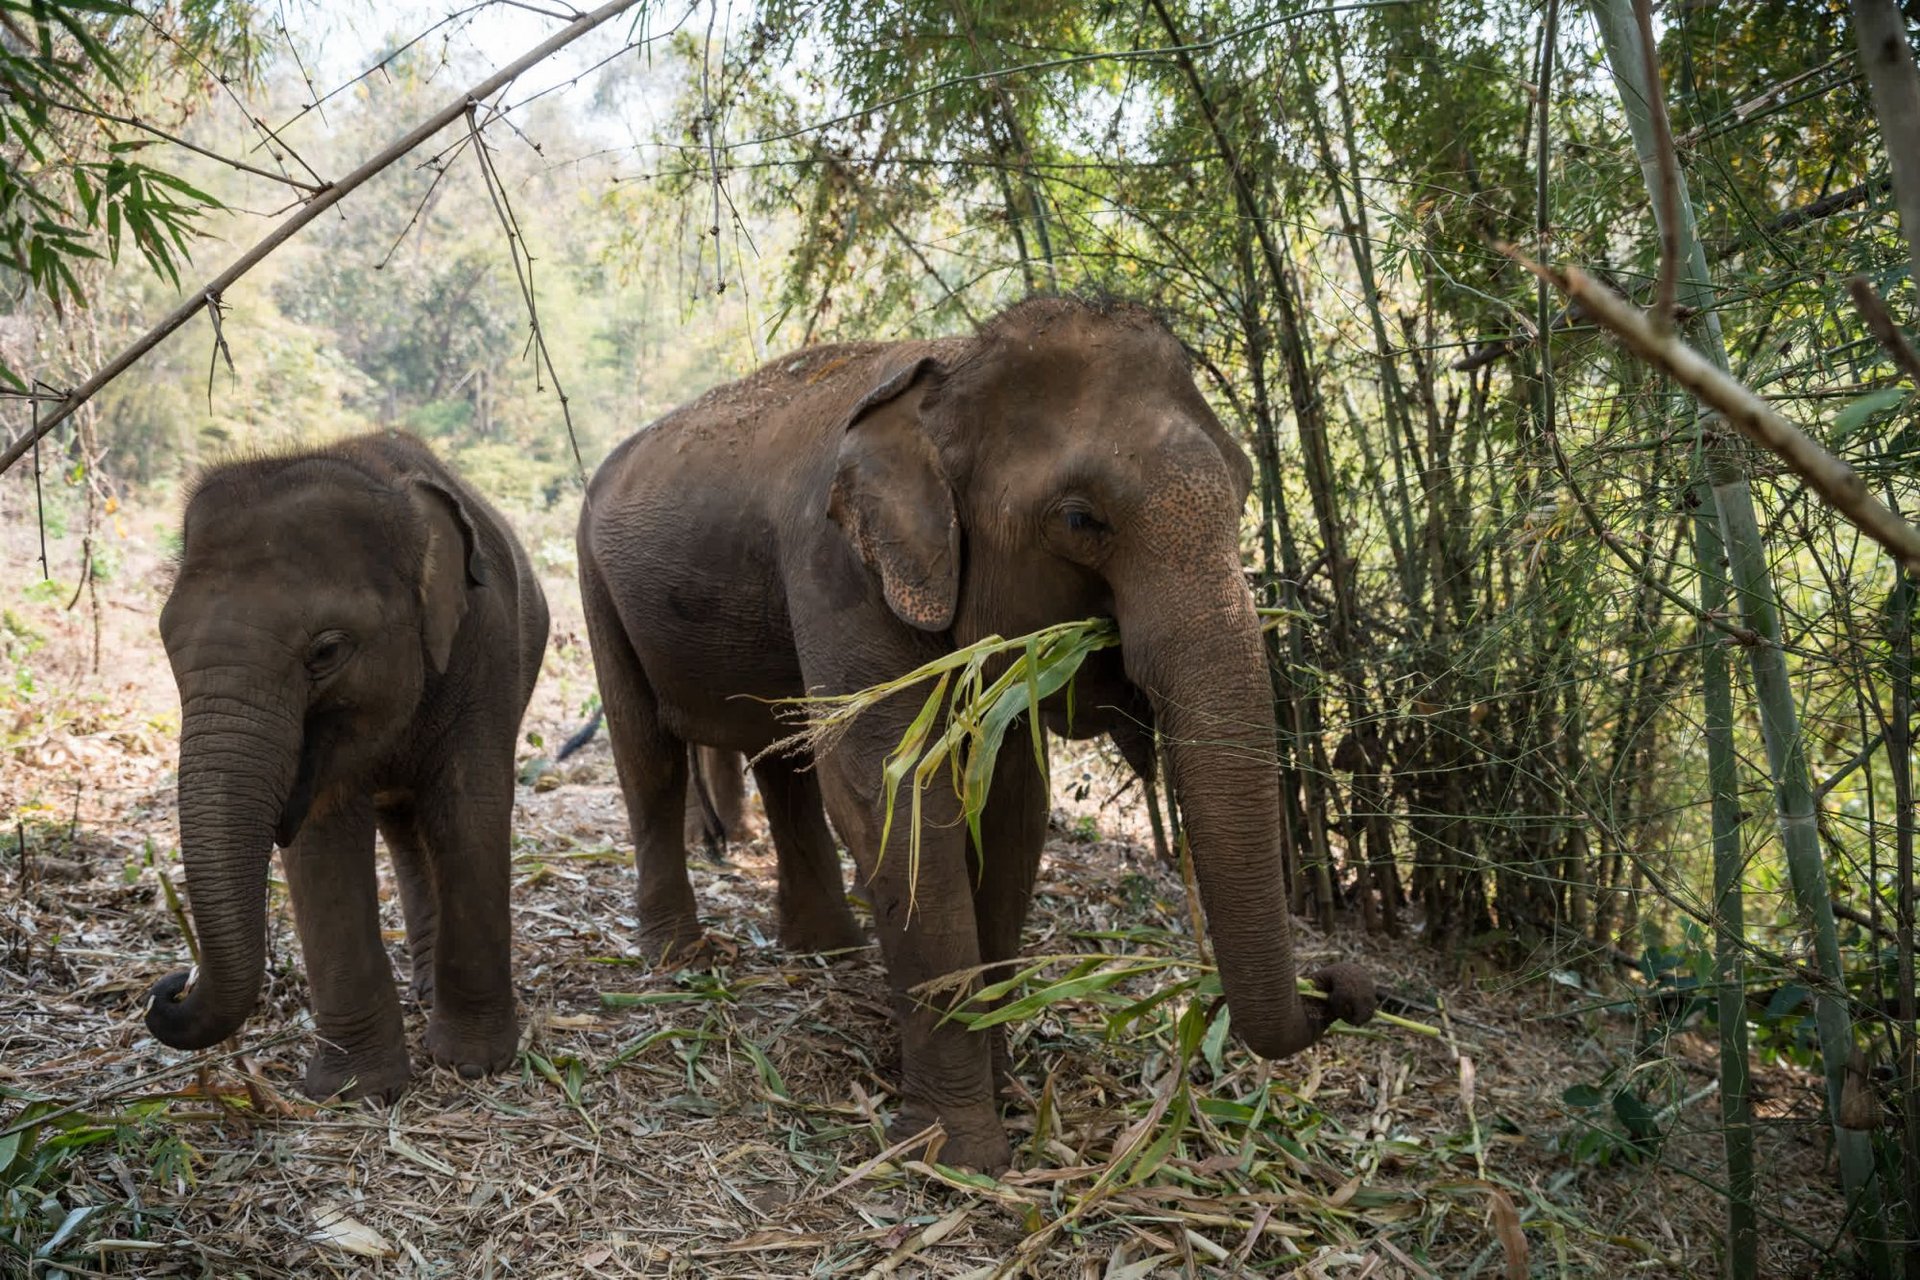 \"Happy Elephant Care Valley in Chiang Mai, Thailand\"